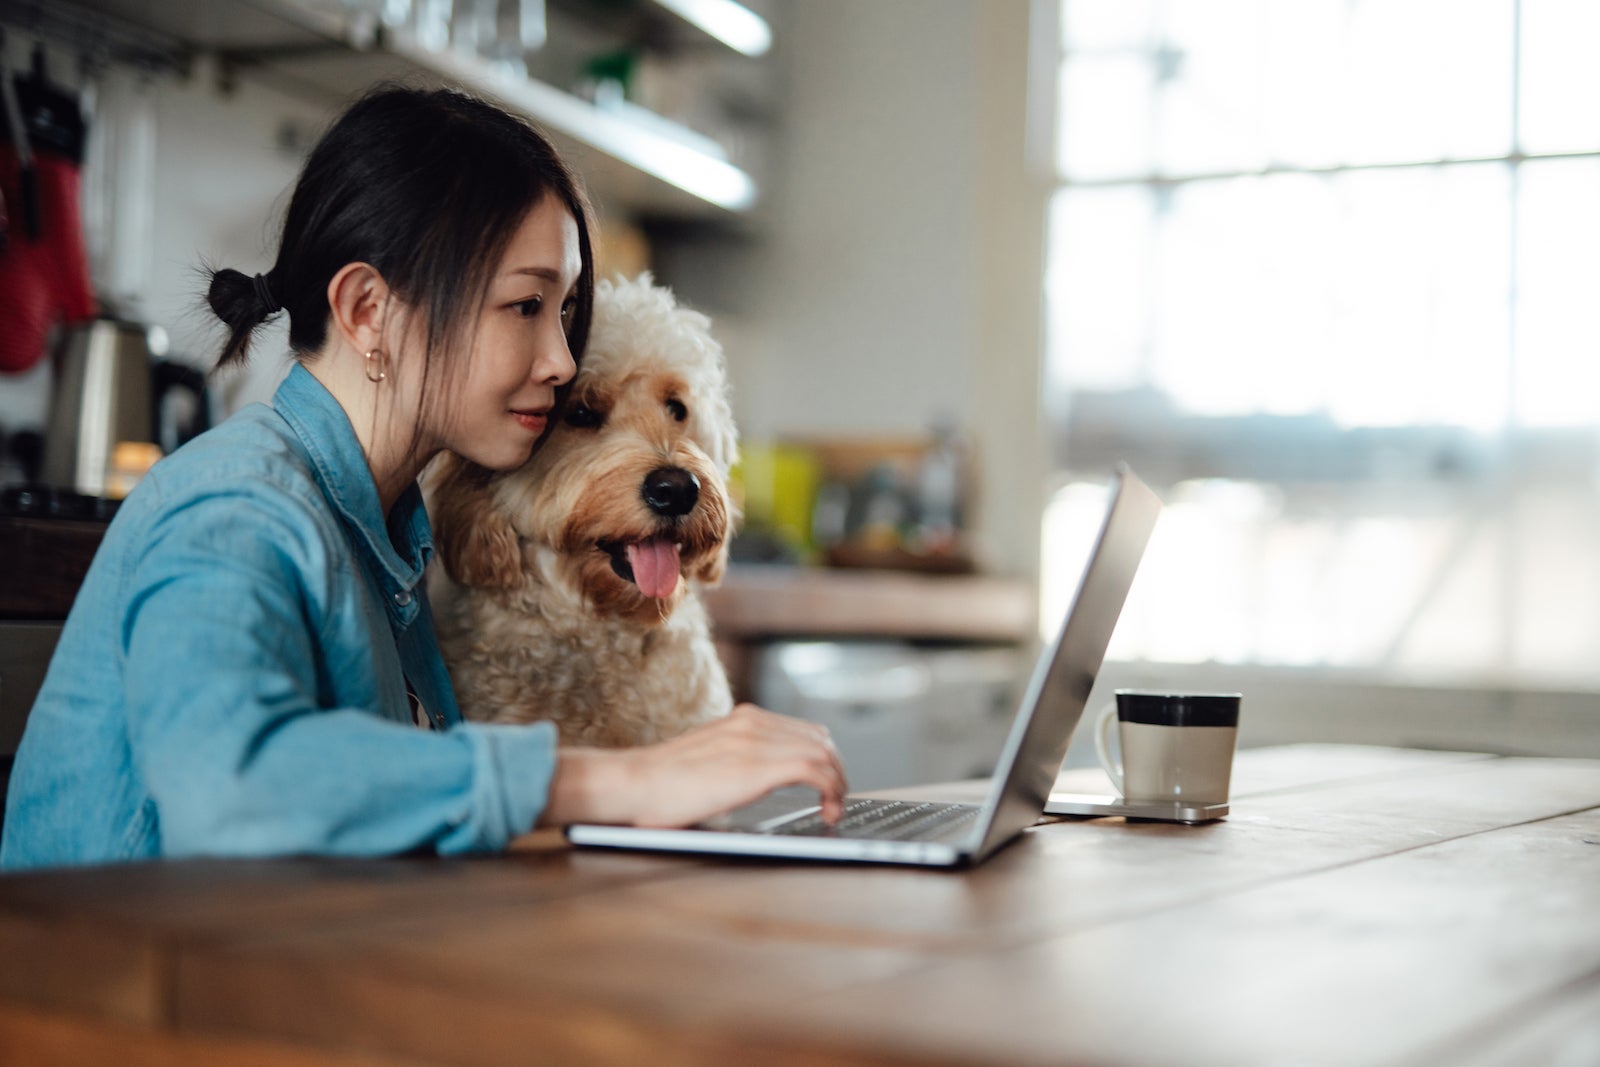 An Asian woman holds her dog while using a laptop to shop online